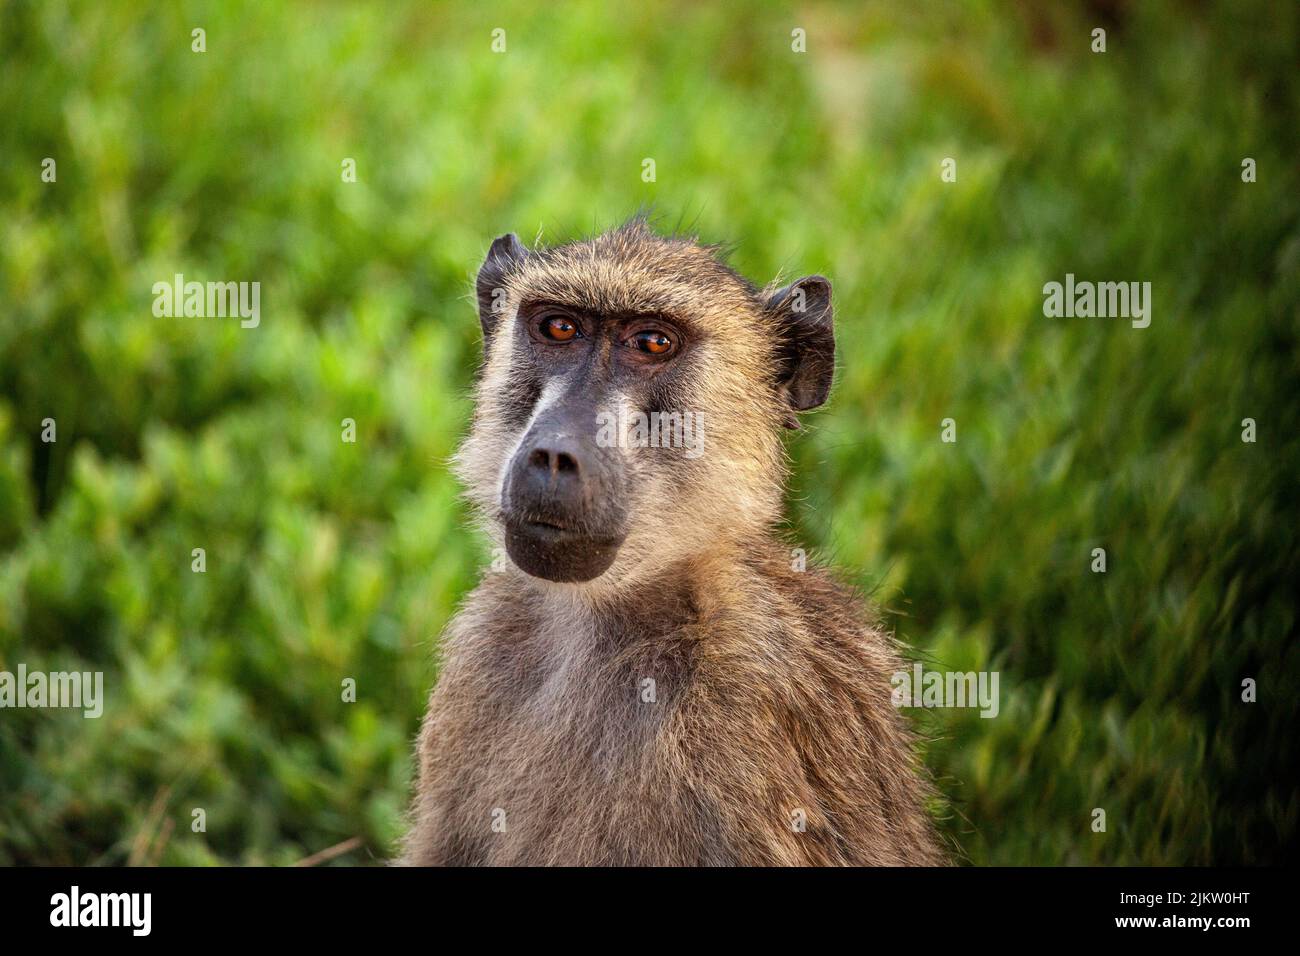 At sunset, many animals will seat calmly as vehicles on game drives pass by like this baboon Stock Photo